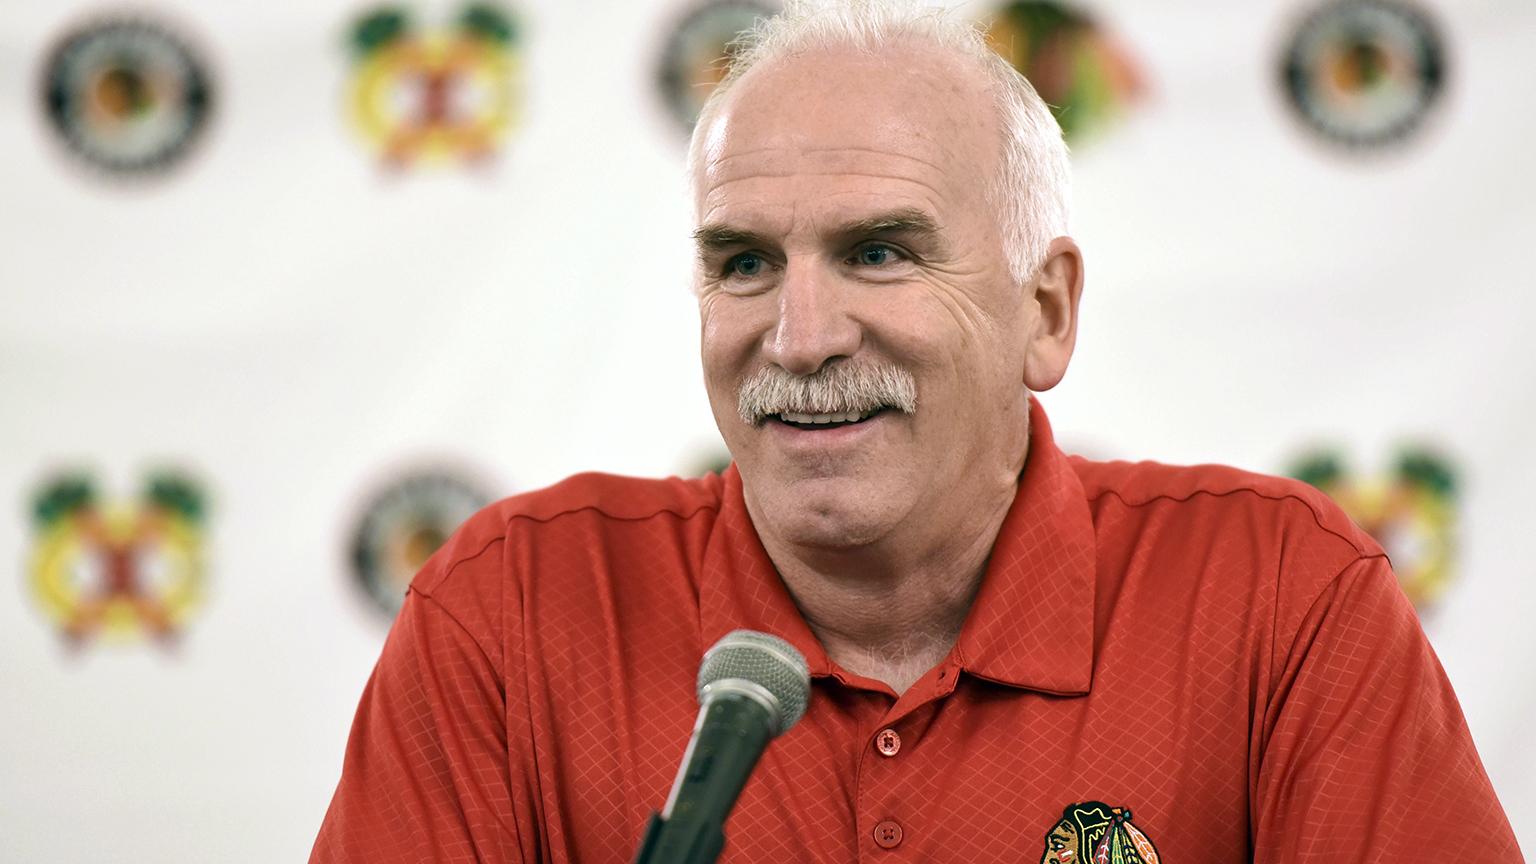 Chicago Blackhawks’ head coach Joel Quenneville speaks at a news conference July 21, 2017, during the NHL hockey team’s convention in Chicago. (G-Jun Yam / AP File Photo)